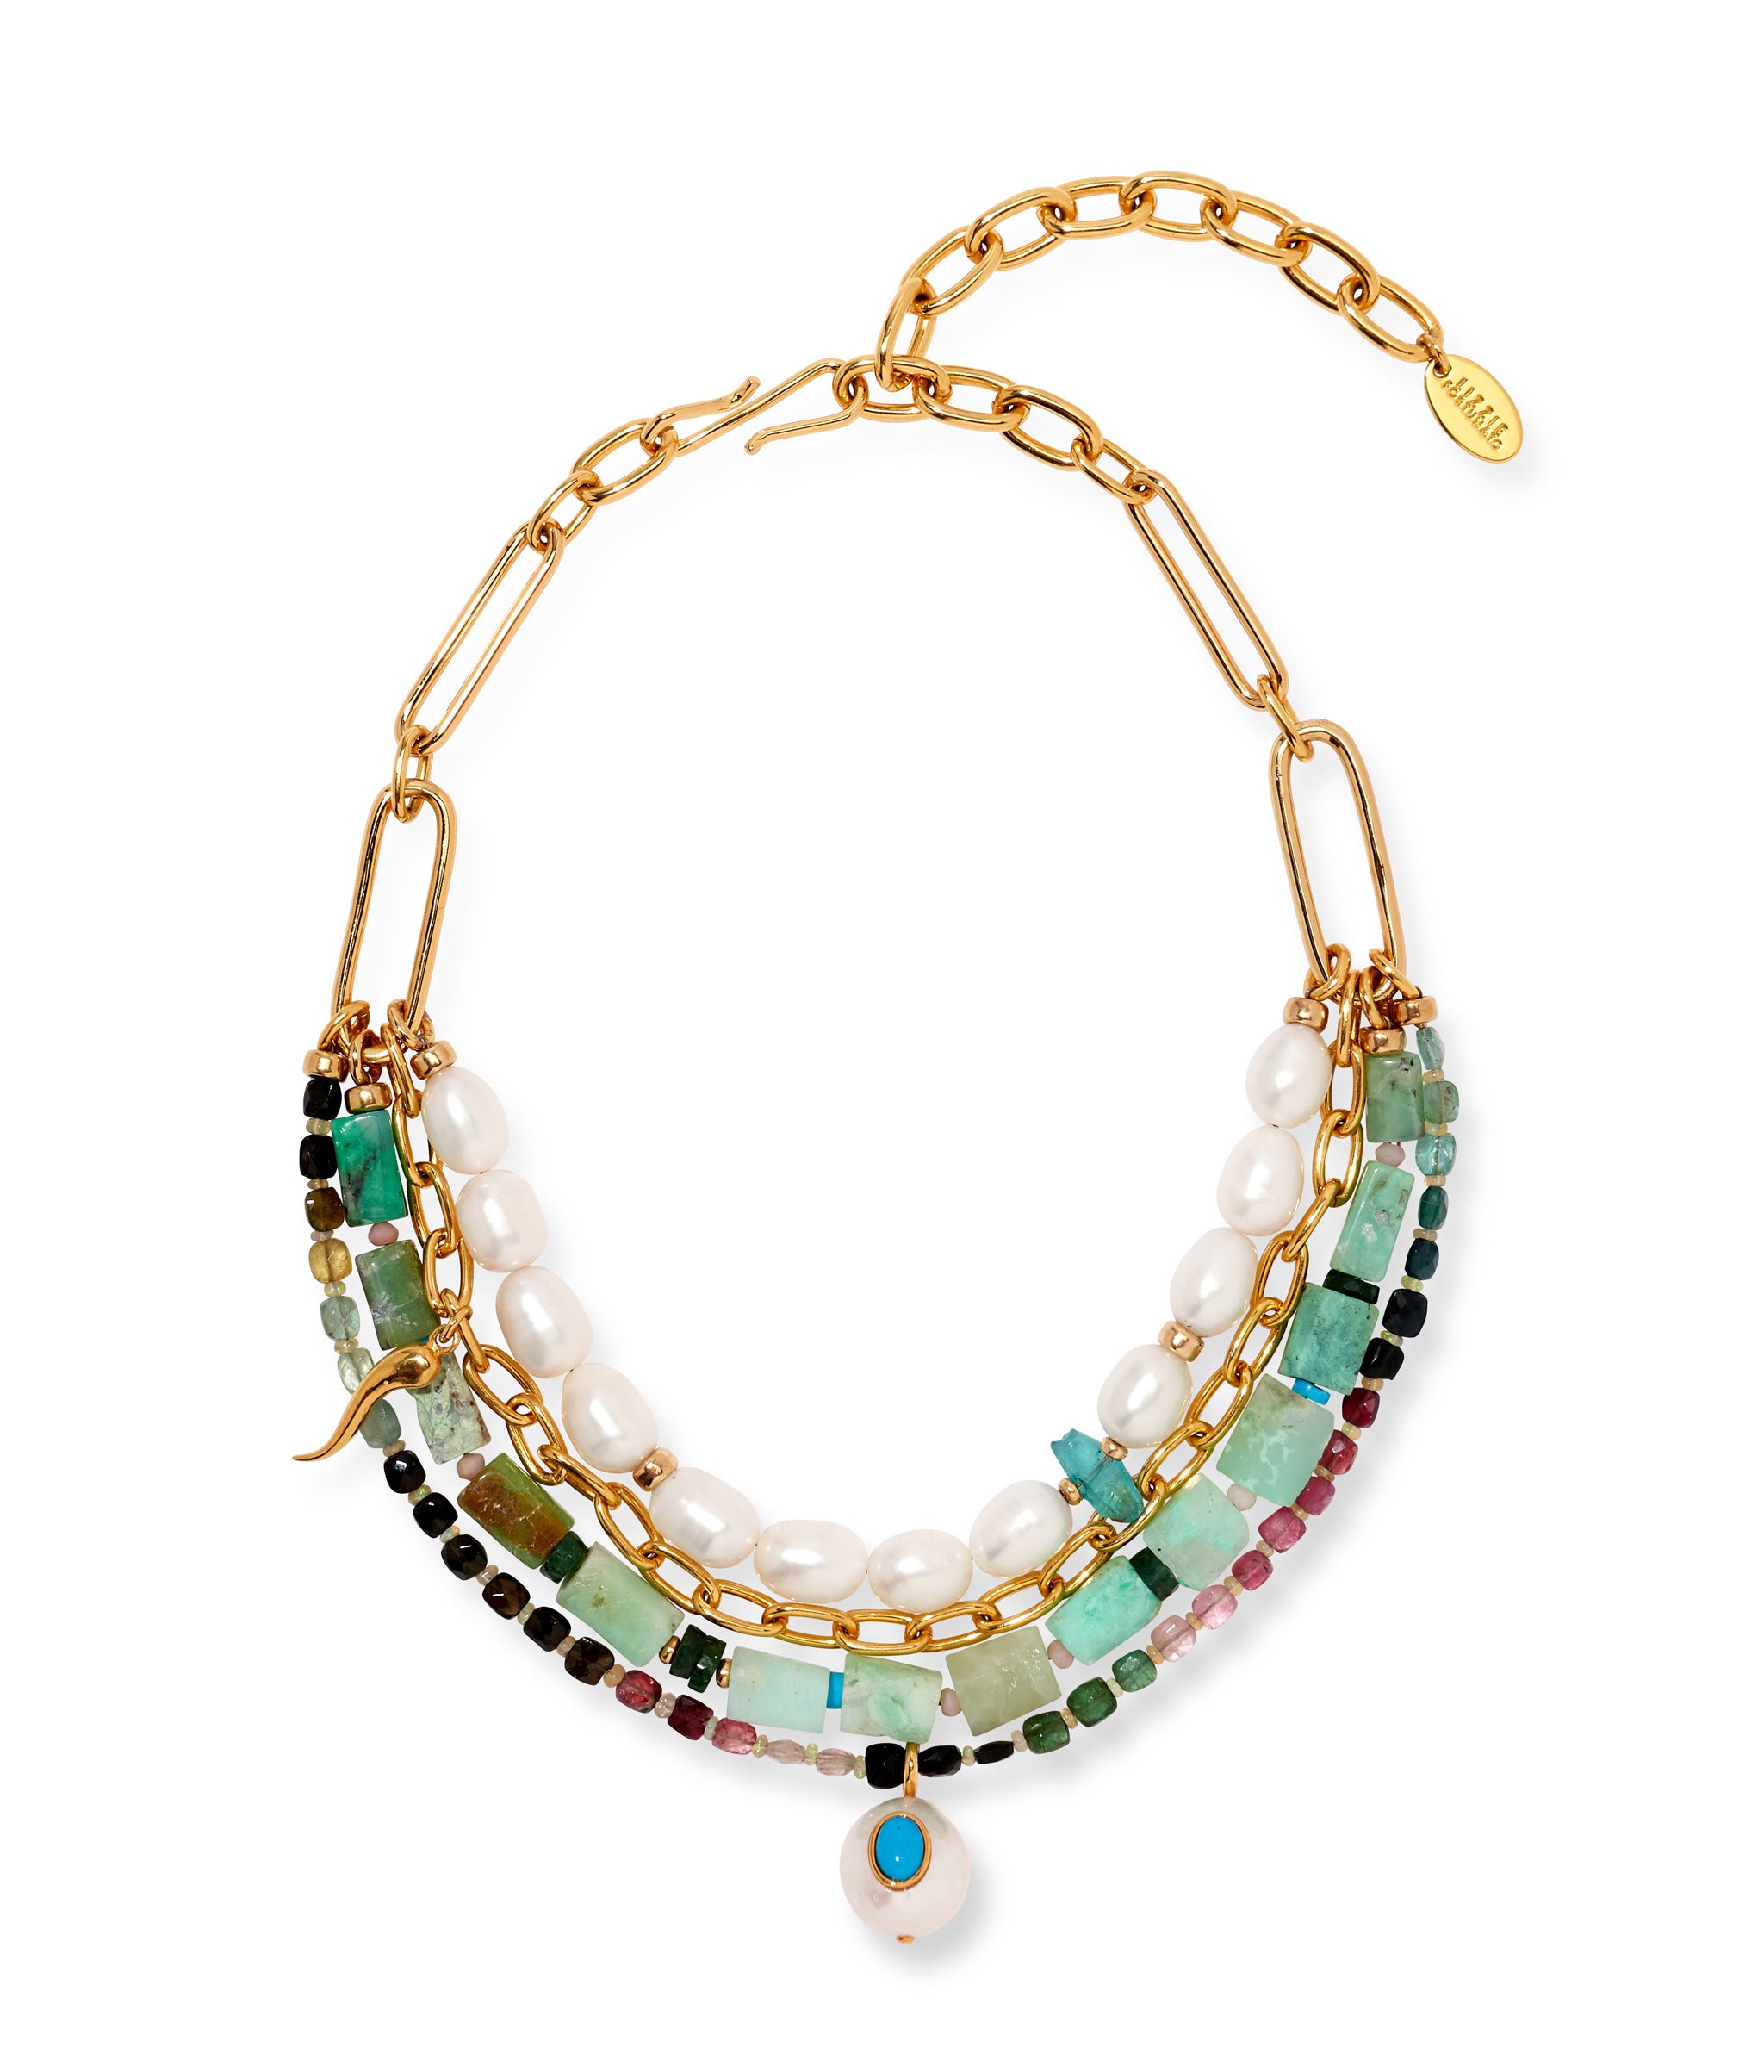 Vizcaya Necklace in Mint. Multi-strands with gold chain, pearl, green chrysoprase beads and pearl and turquoise charm.